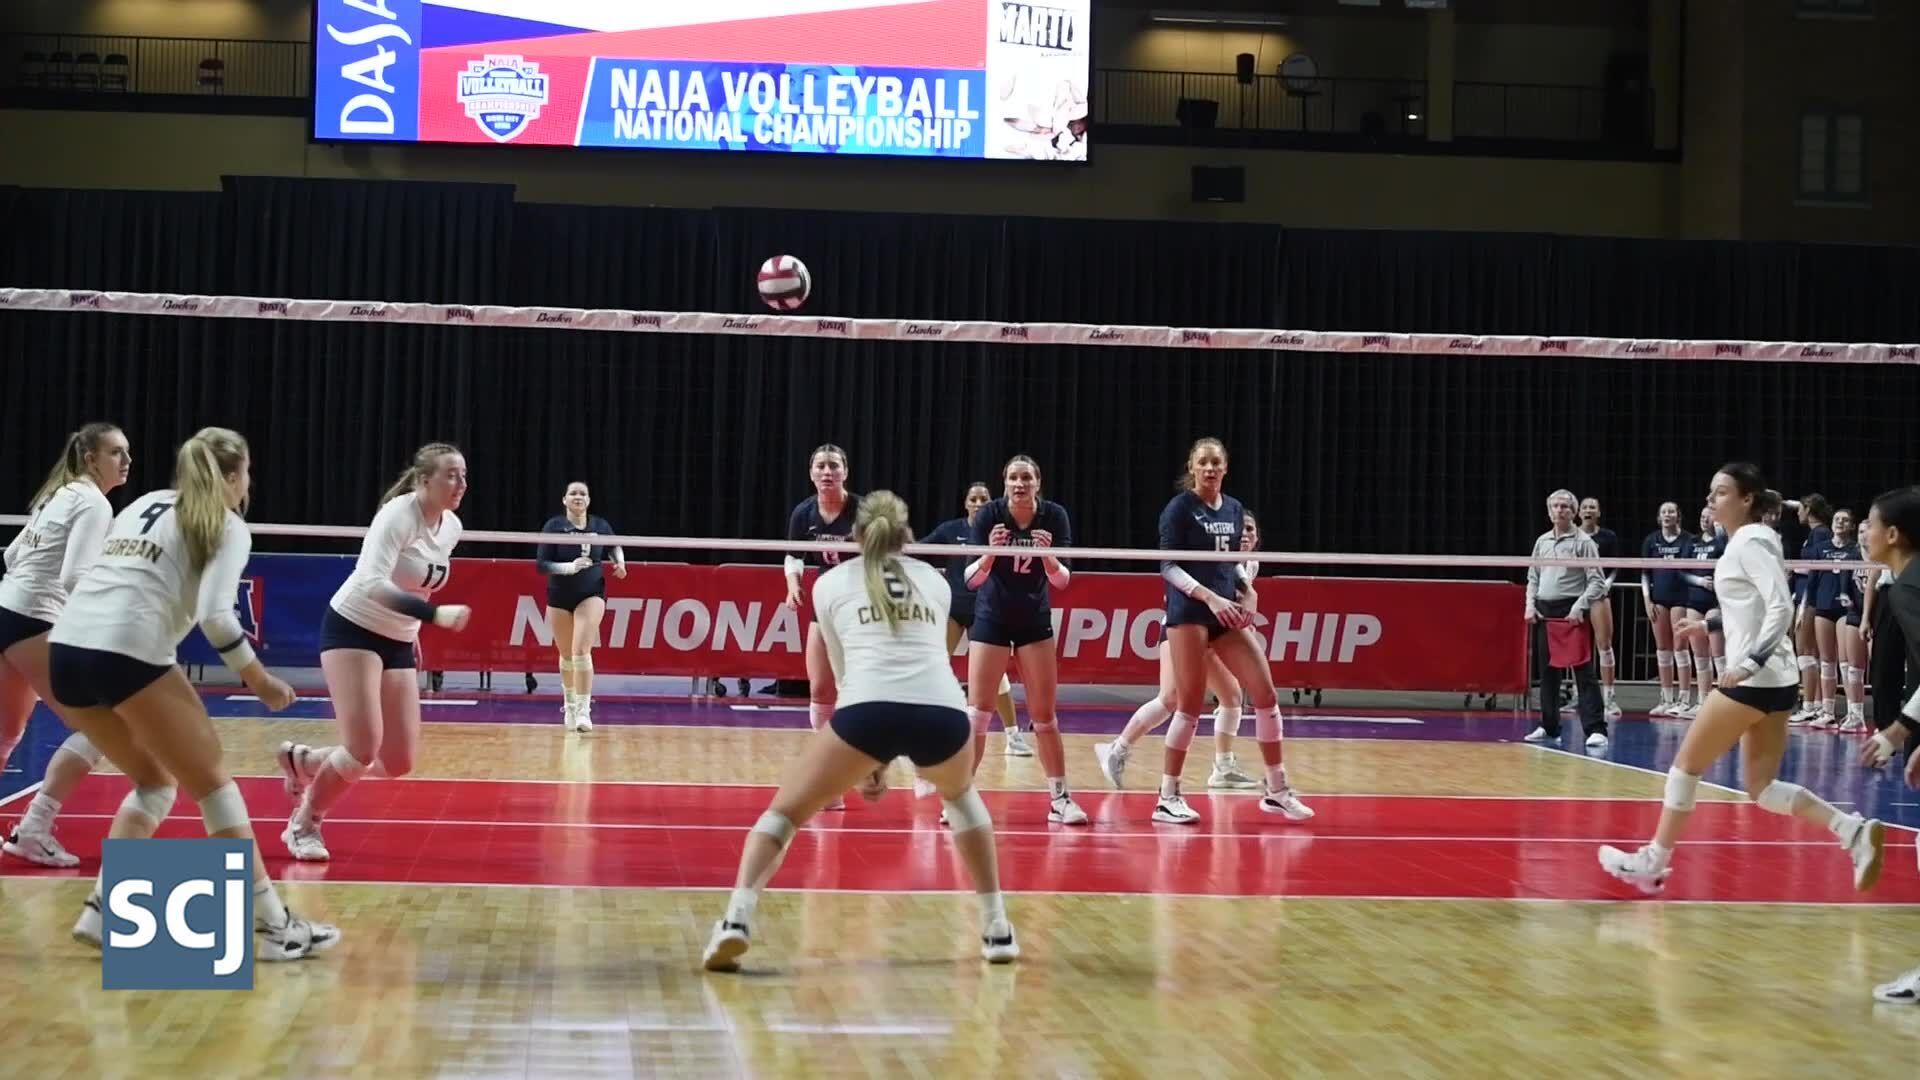 Corban-Jamestown matchup will produce first-time womens national volleyball champion in NAIA tournament